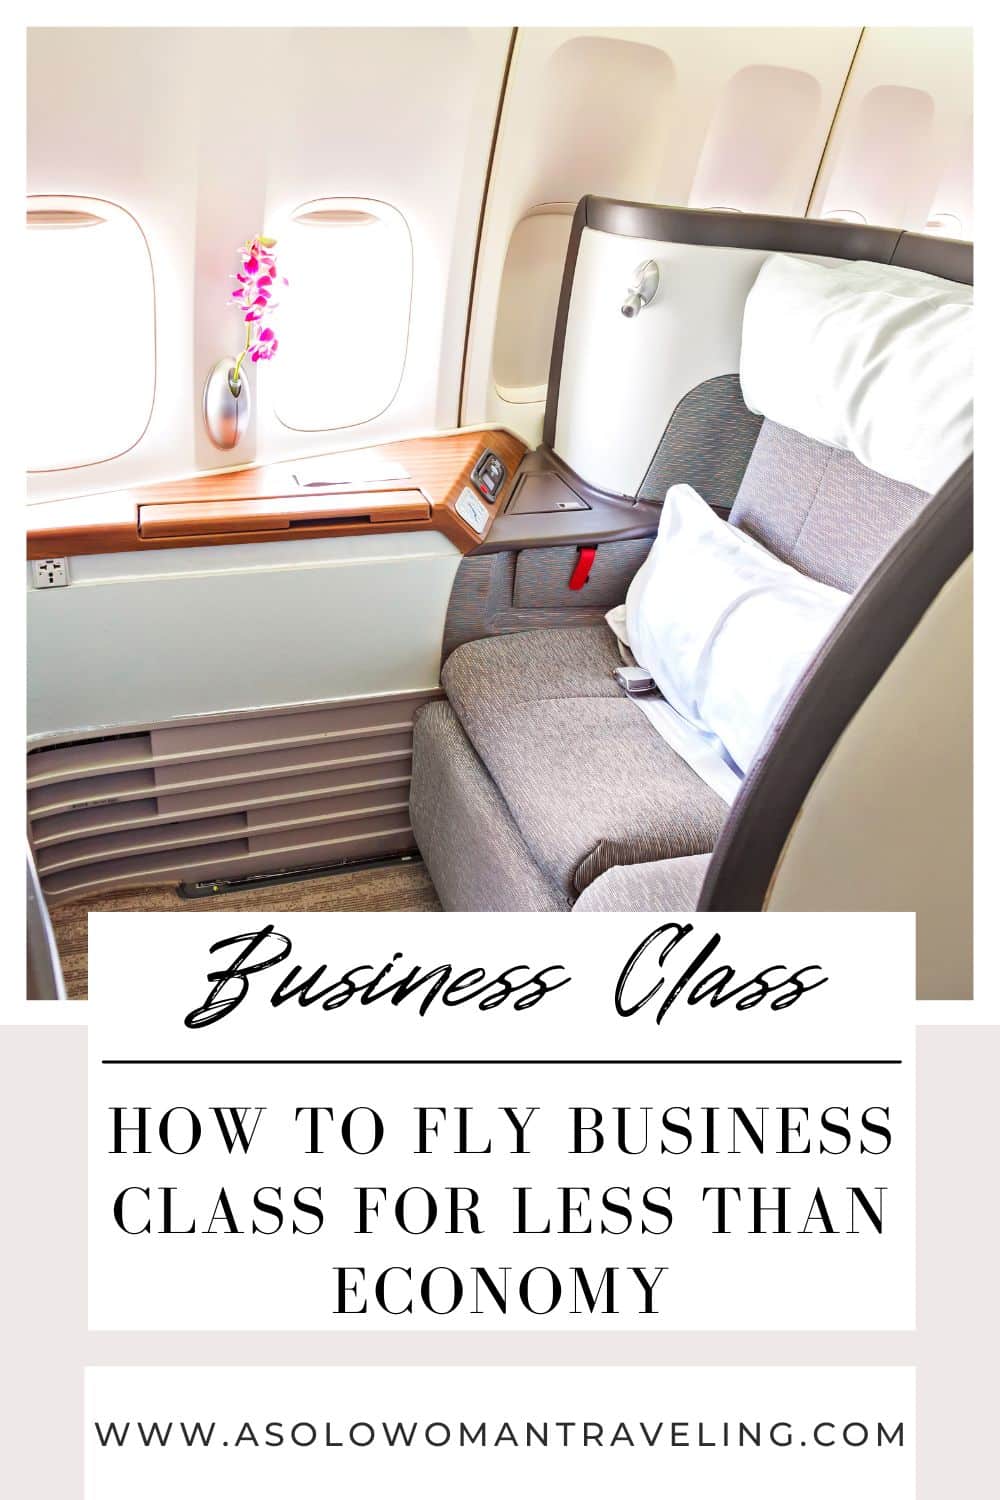 Fly Business Class for Less!